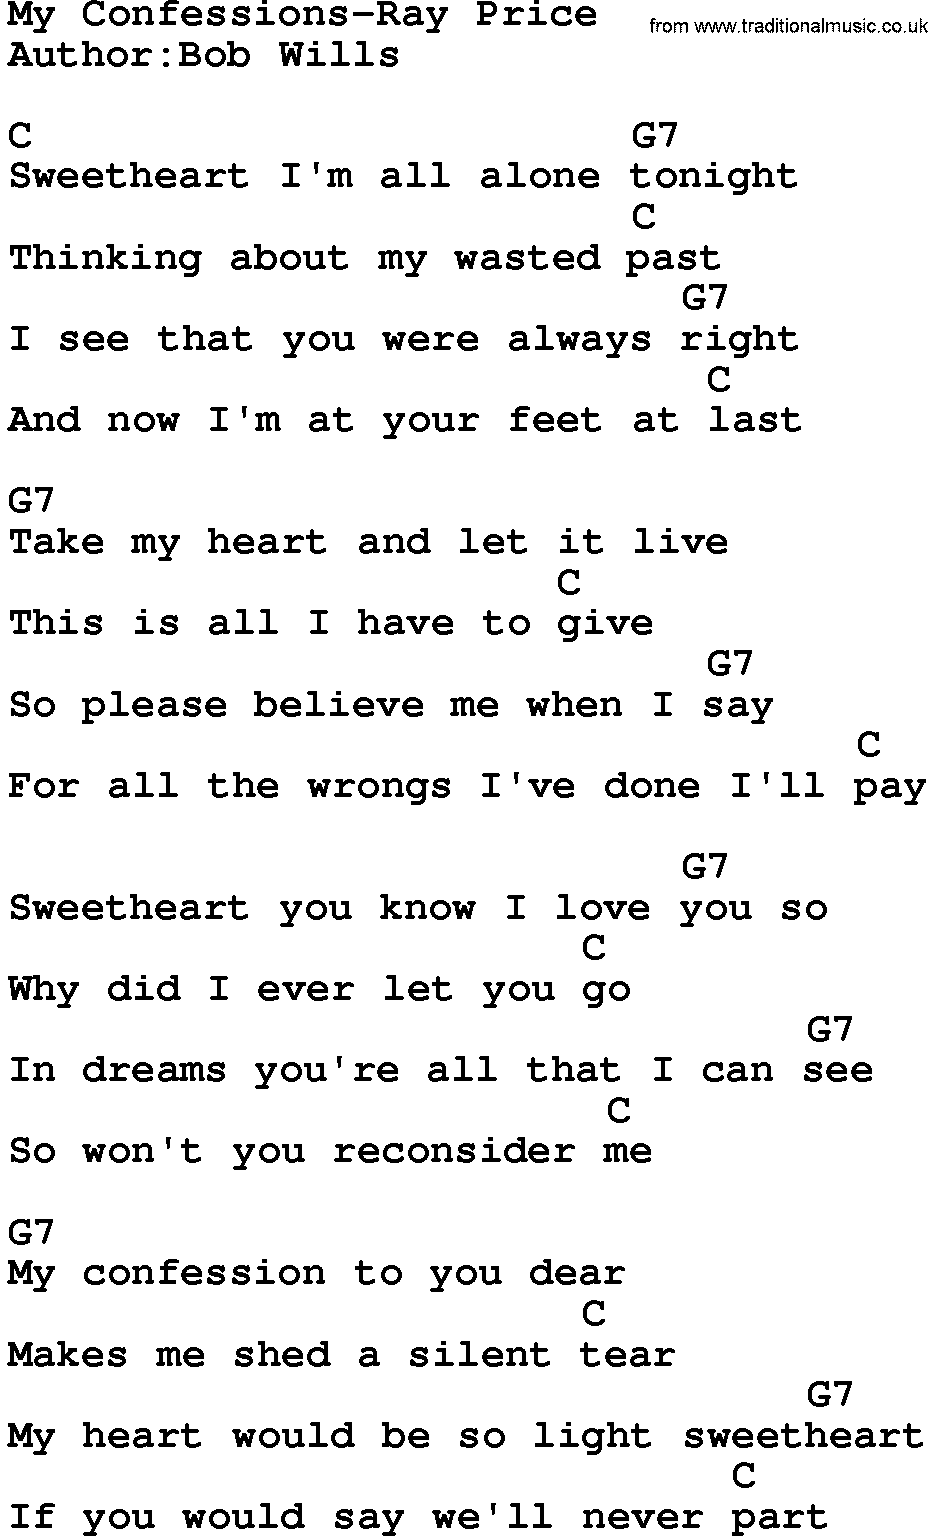 Country music song: My Confessions-Ray Price lyrics and chords